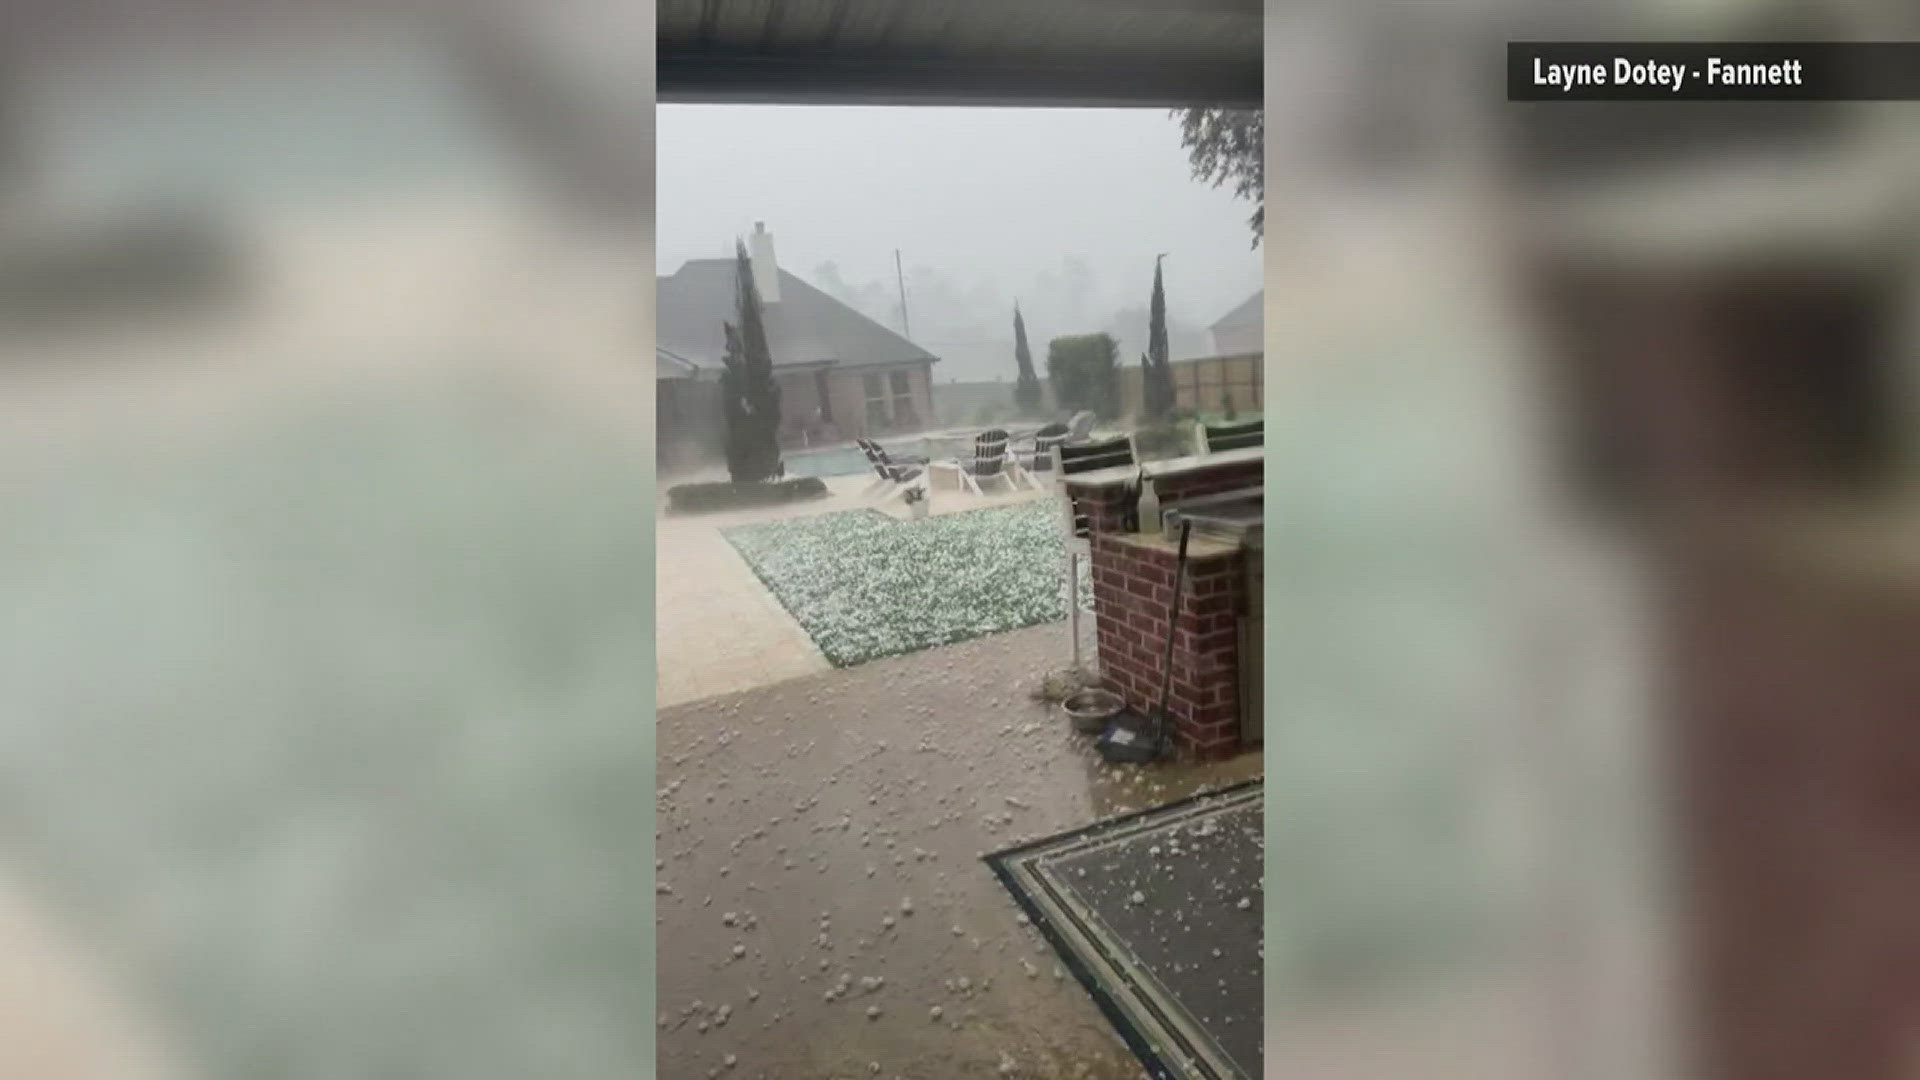 Port Arthur also saw hail up to 1 inch in diameter, the majority of Hamshire and Fannett each saw ping pong ball sized hail, but some reported up to baseball sized.